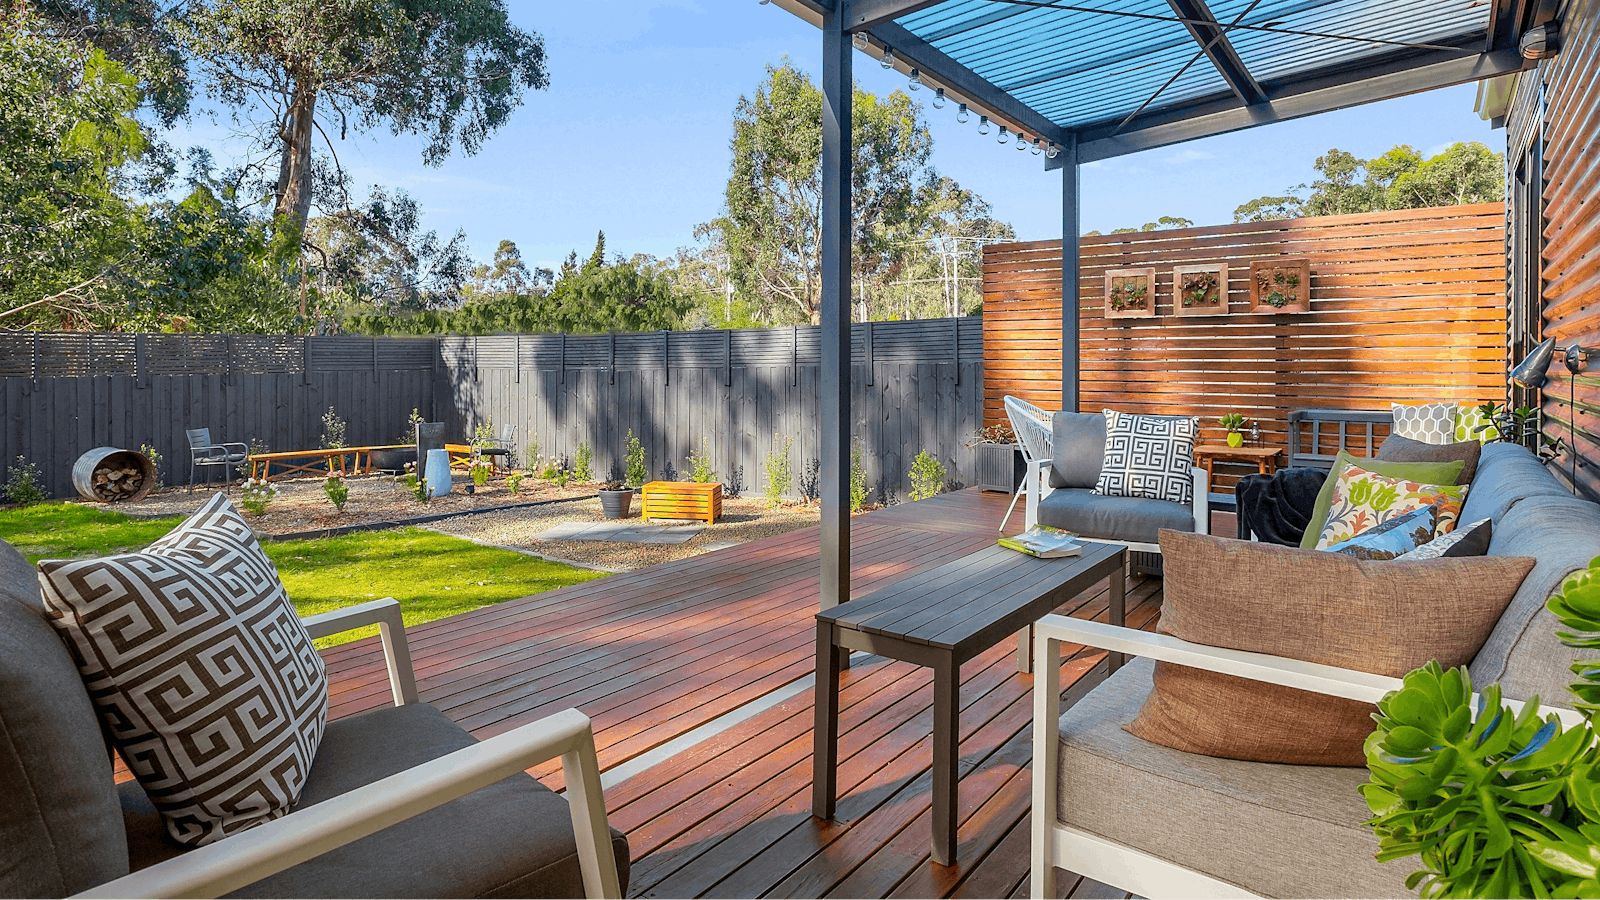 Generous, sun-drenched rear entertaining deck with BBQ, lounge, dining area & relaxation zones